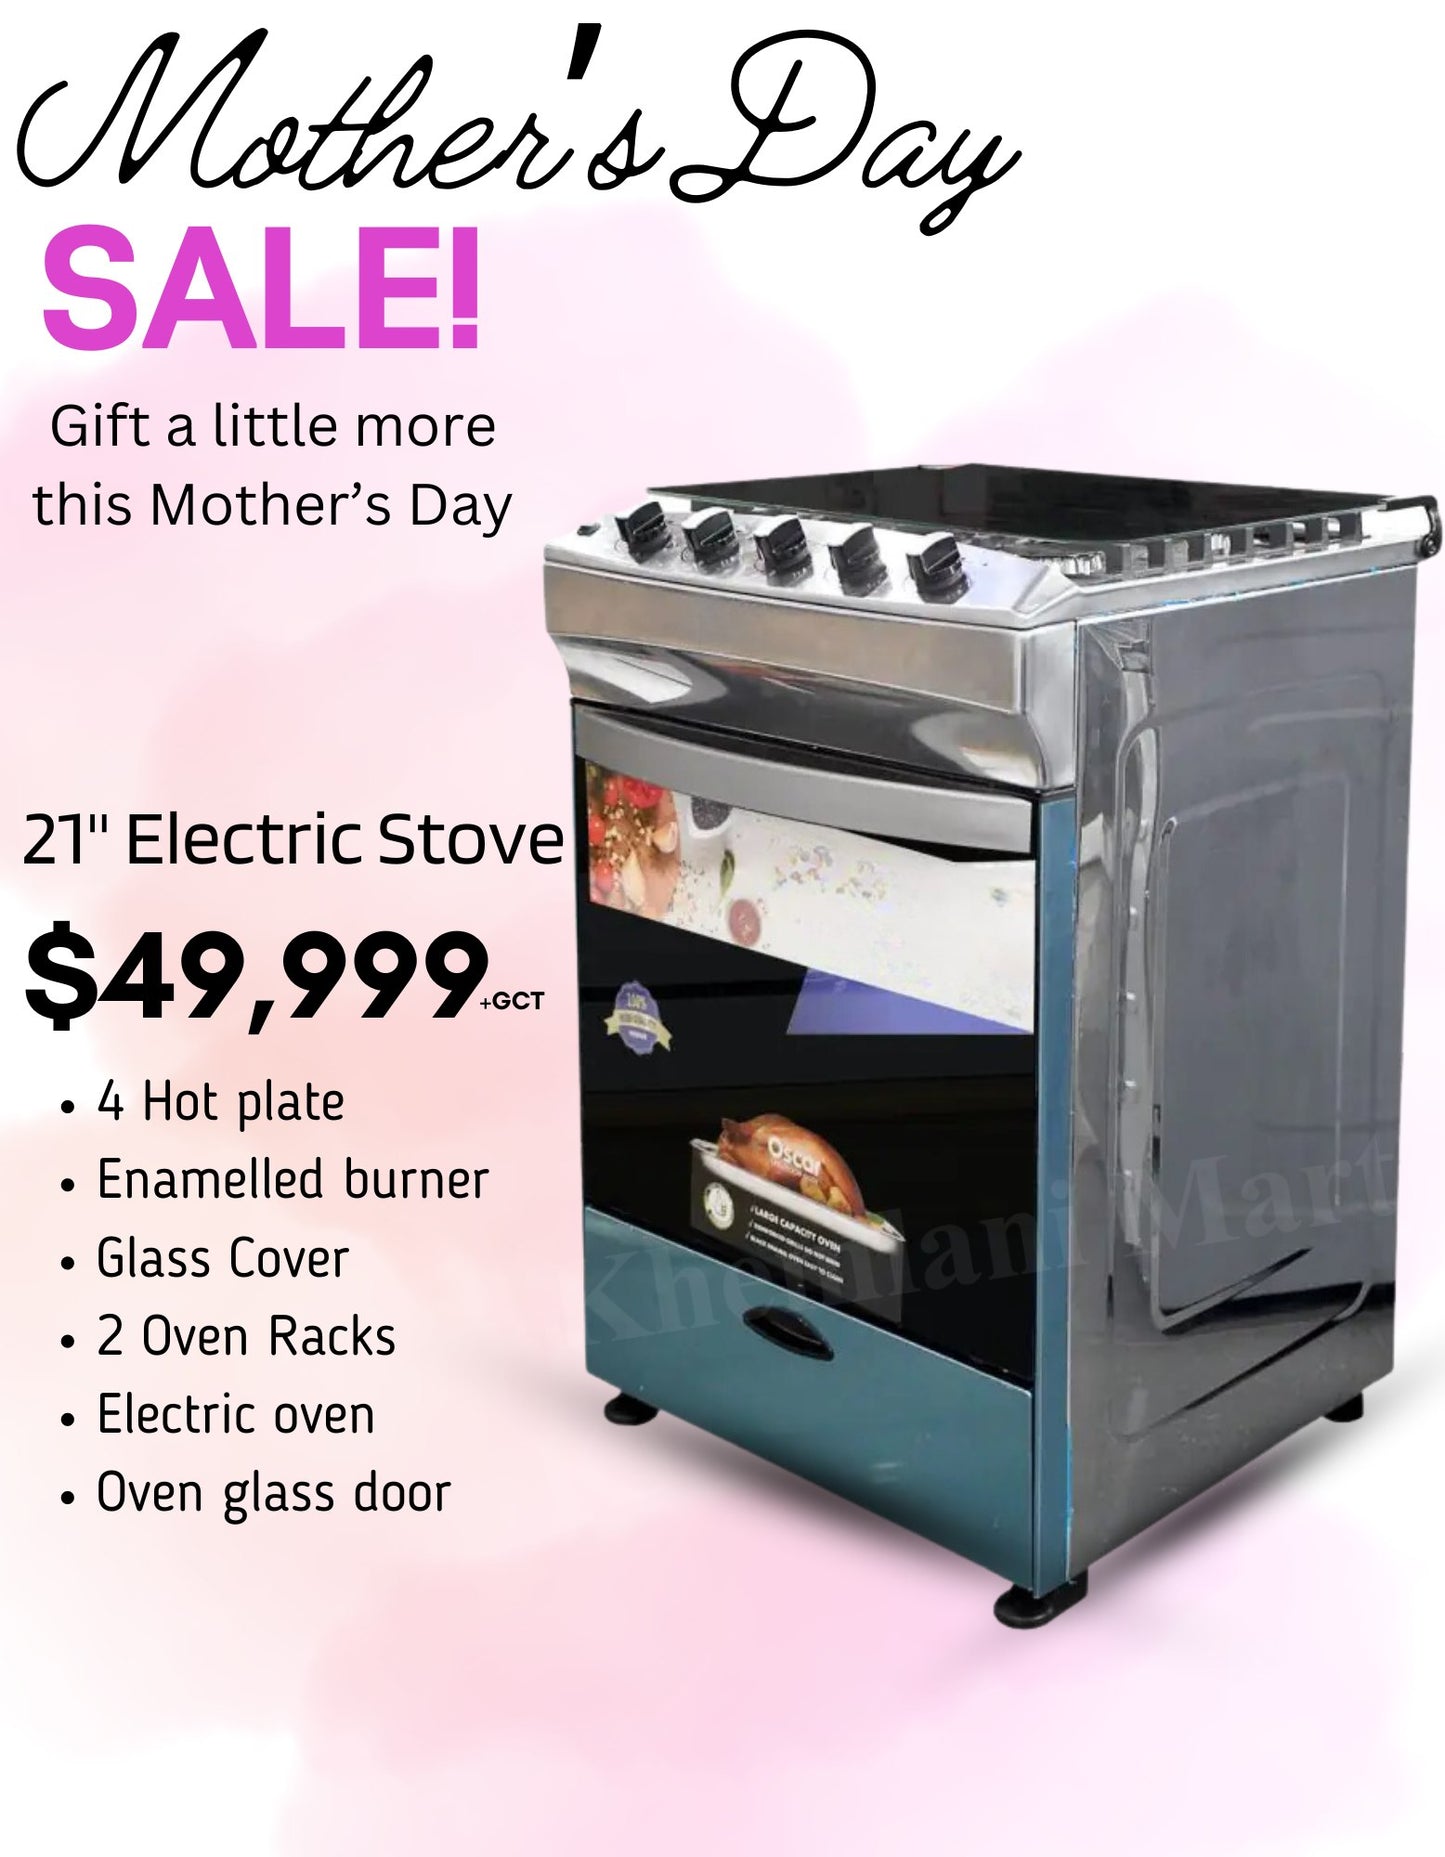 BlackPoint 21" Electric Stove